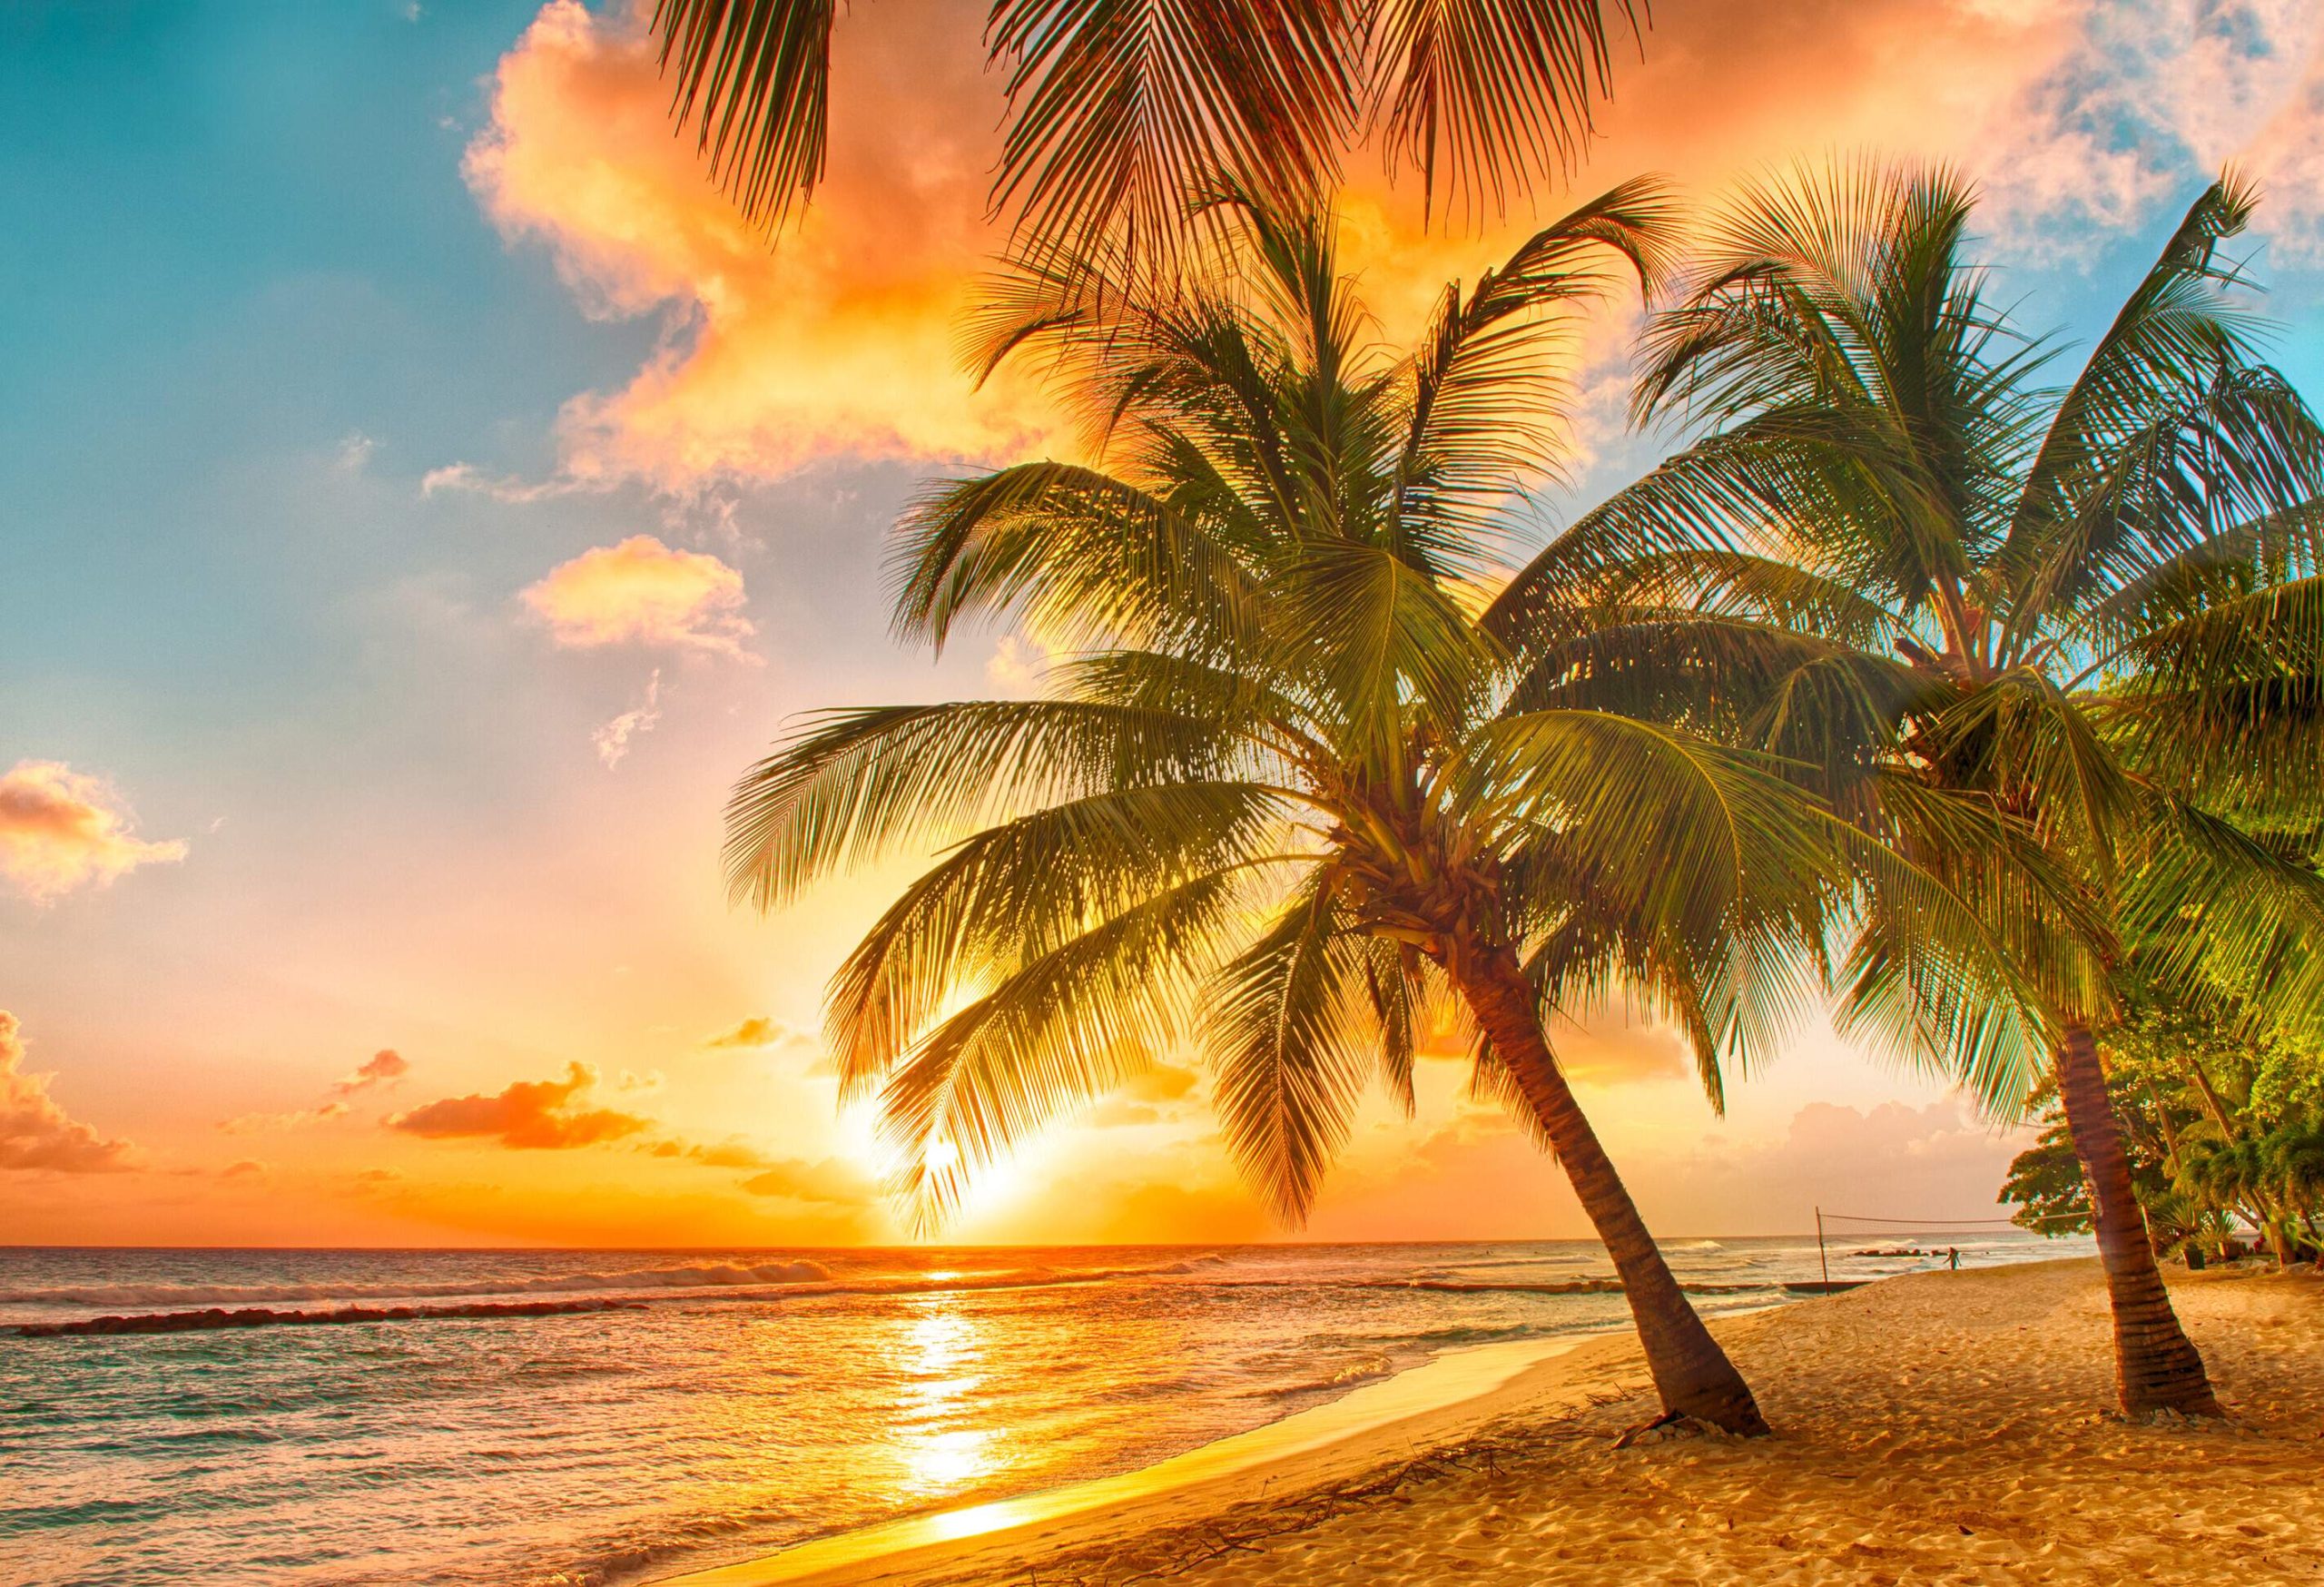 A breathtaking sunset over the sea, providing a picturesque view of palm trees swaying on the pristine white beach.